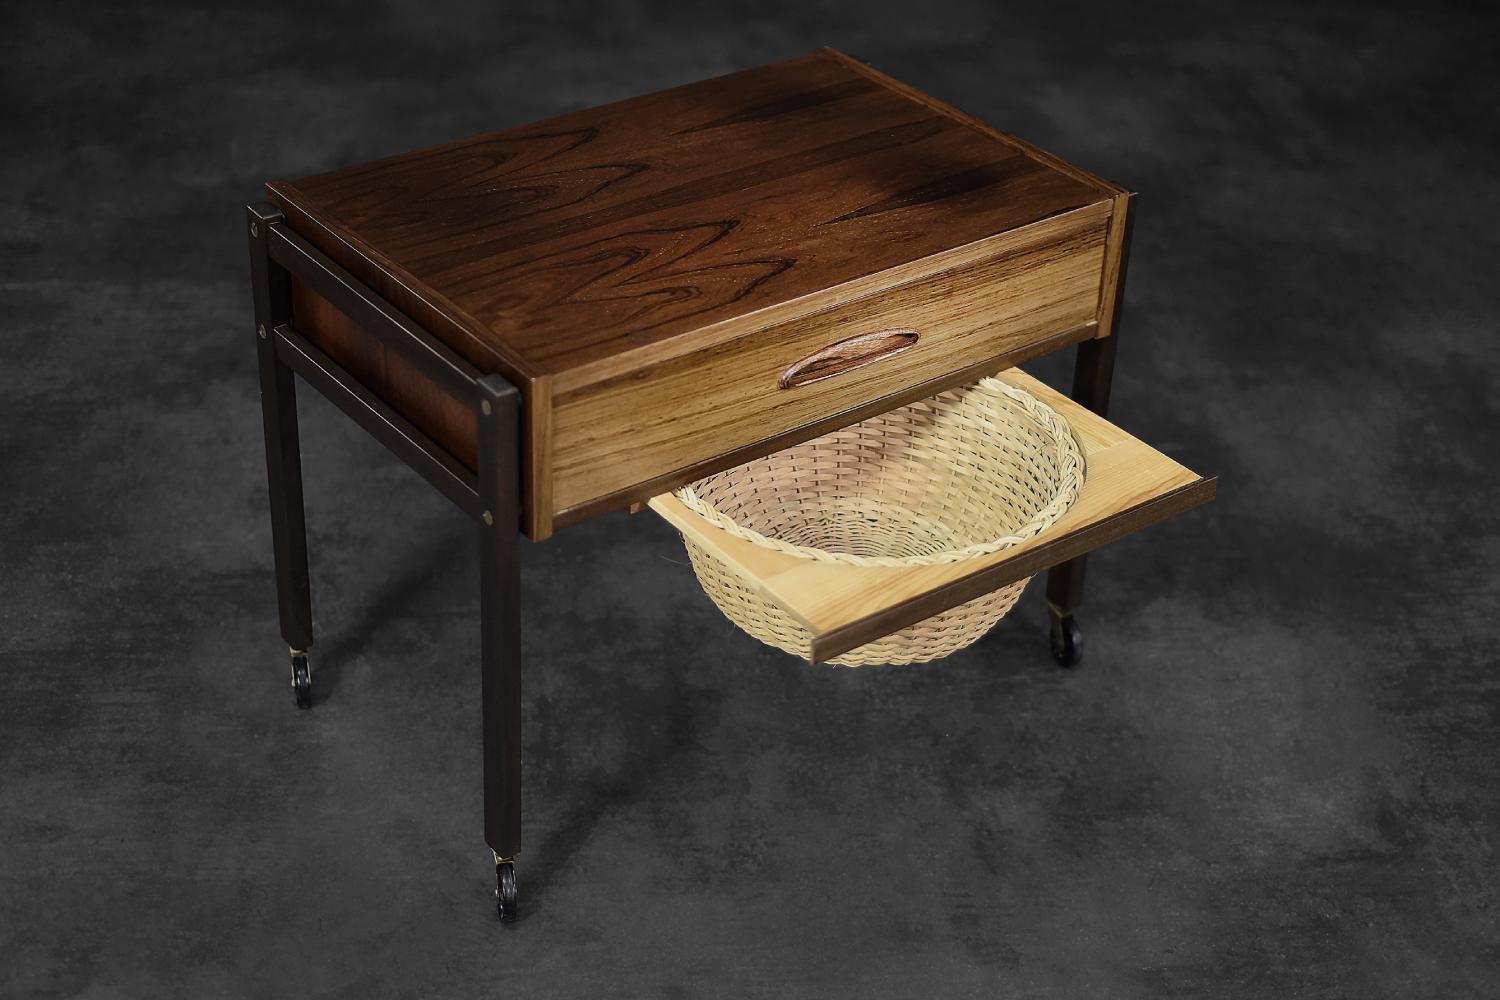 Vintage Midcentury Danish Modern Rosewood Thread Side Table with Wicker Basket For Sale 4